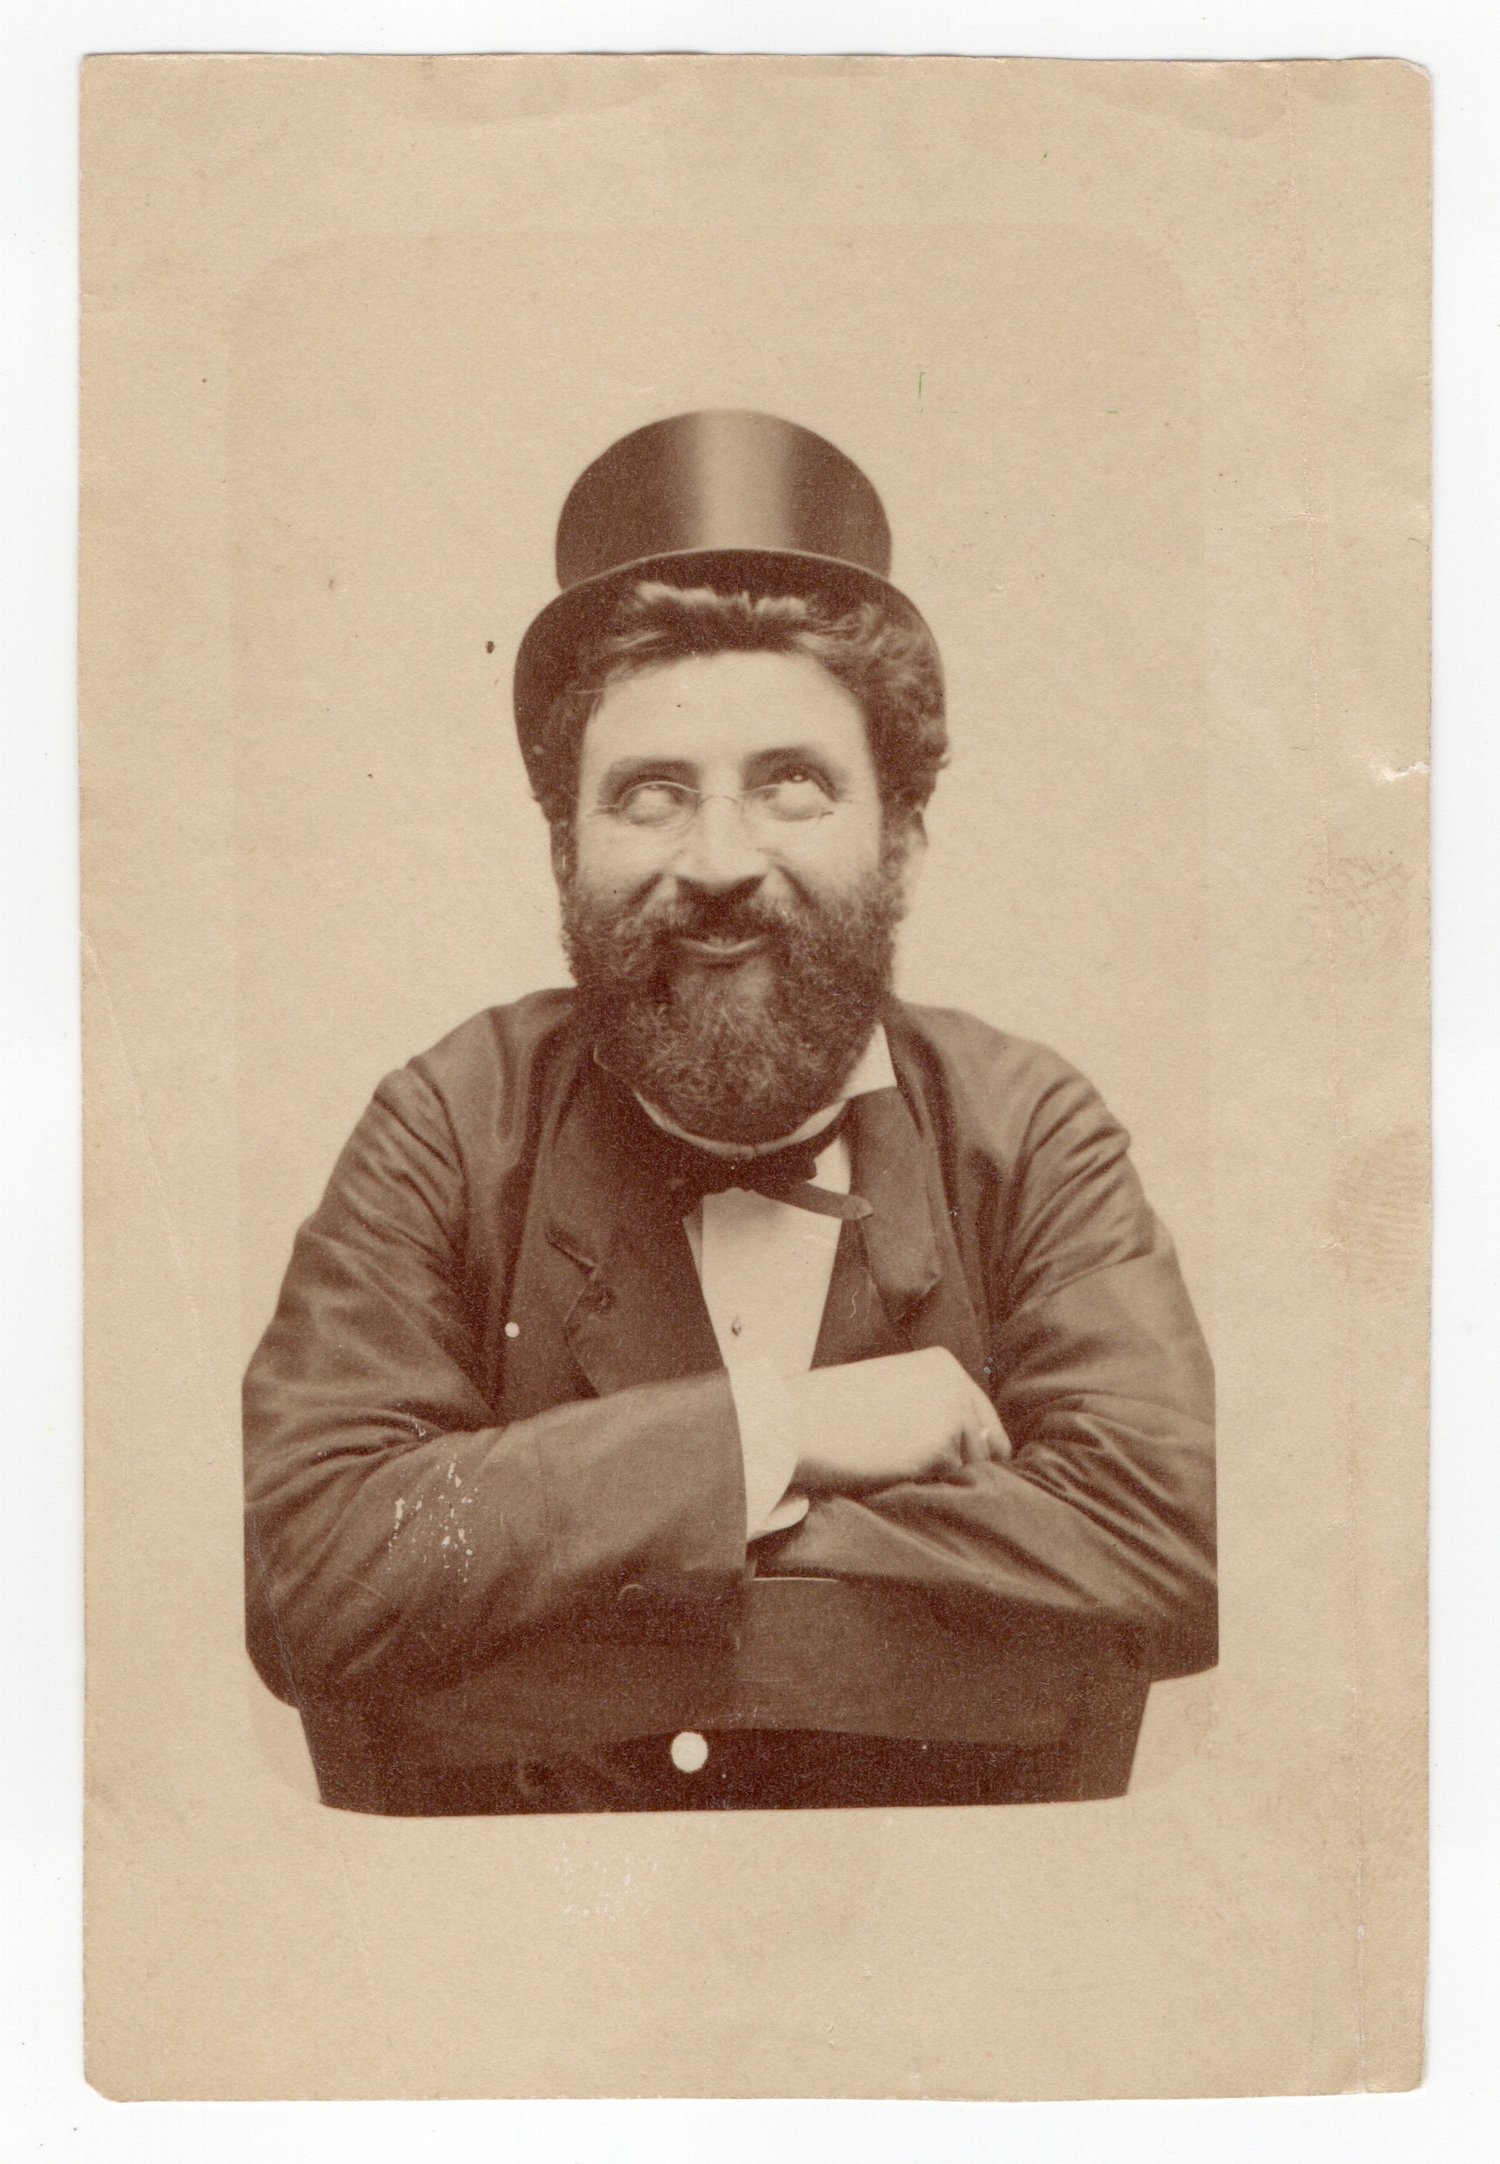 Image of Anonyme: man makes a cray face, ca. 1875